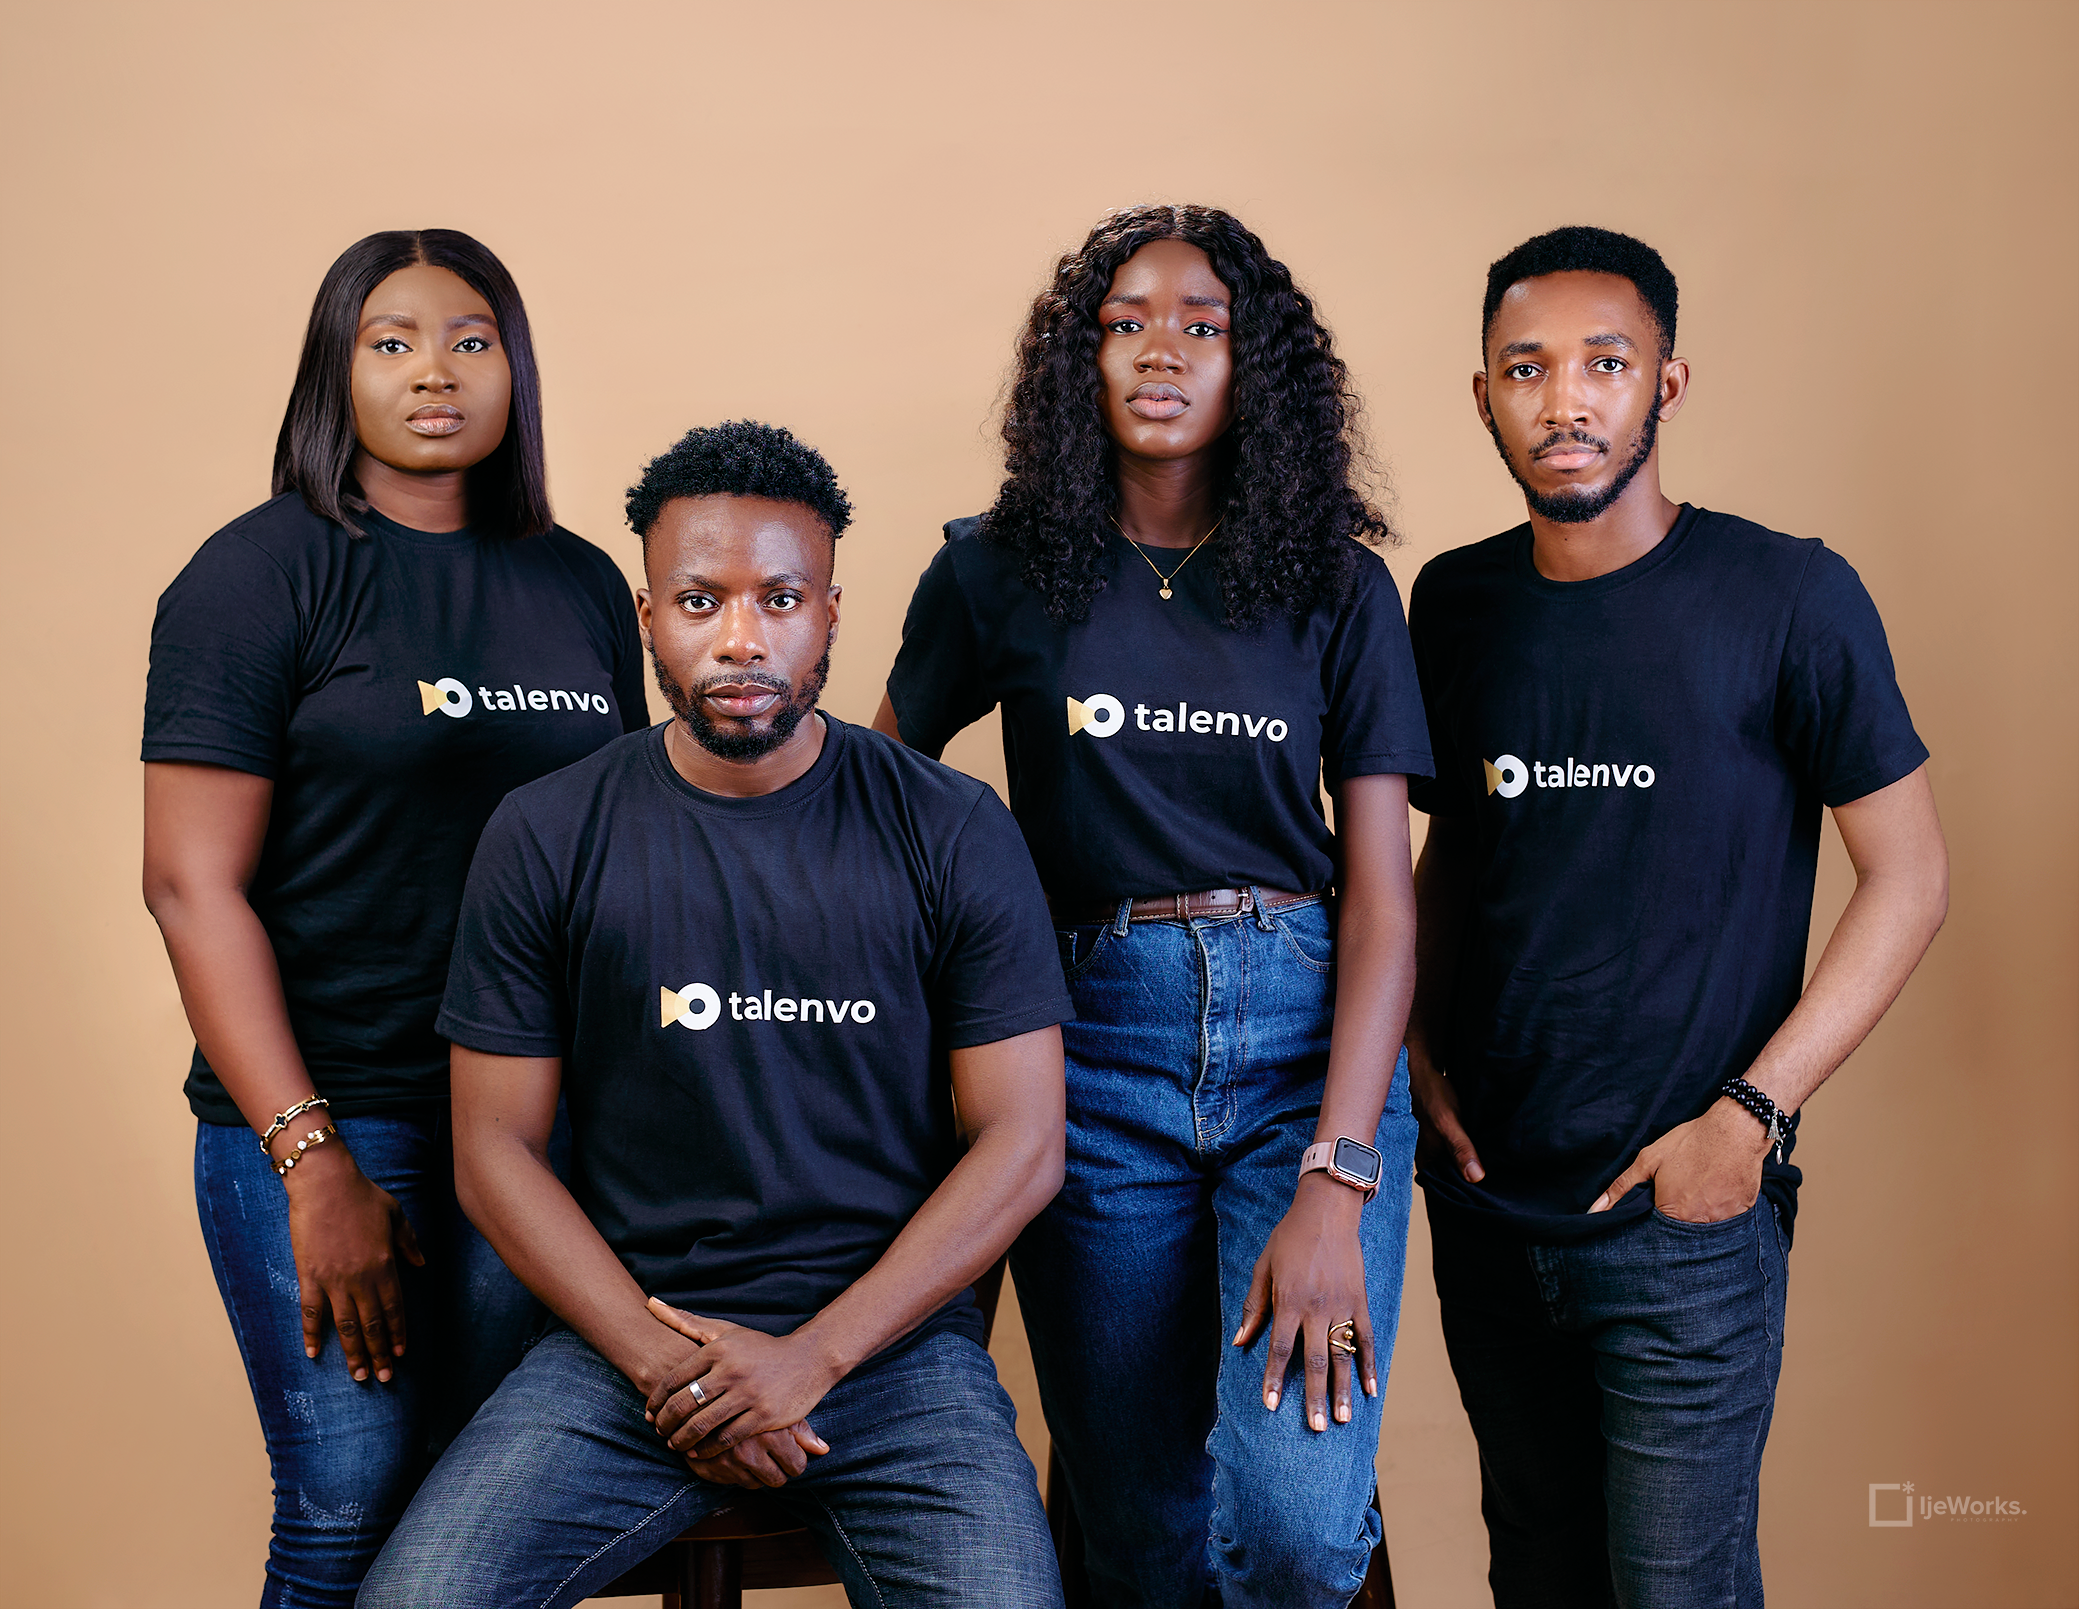 The Talenvo team, that helps provide employement for tech professionals wearing black and standing